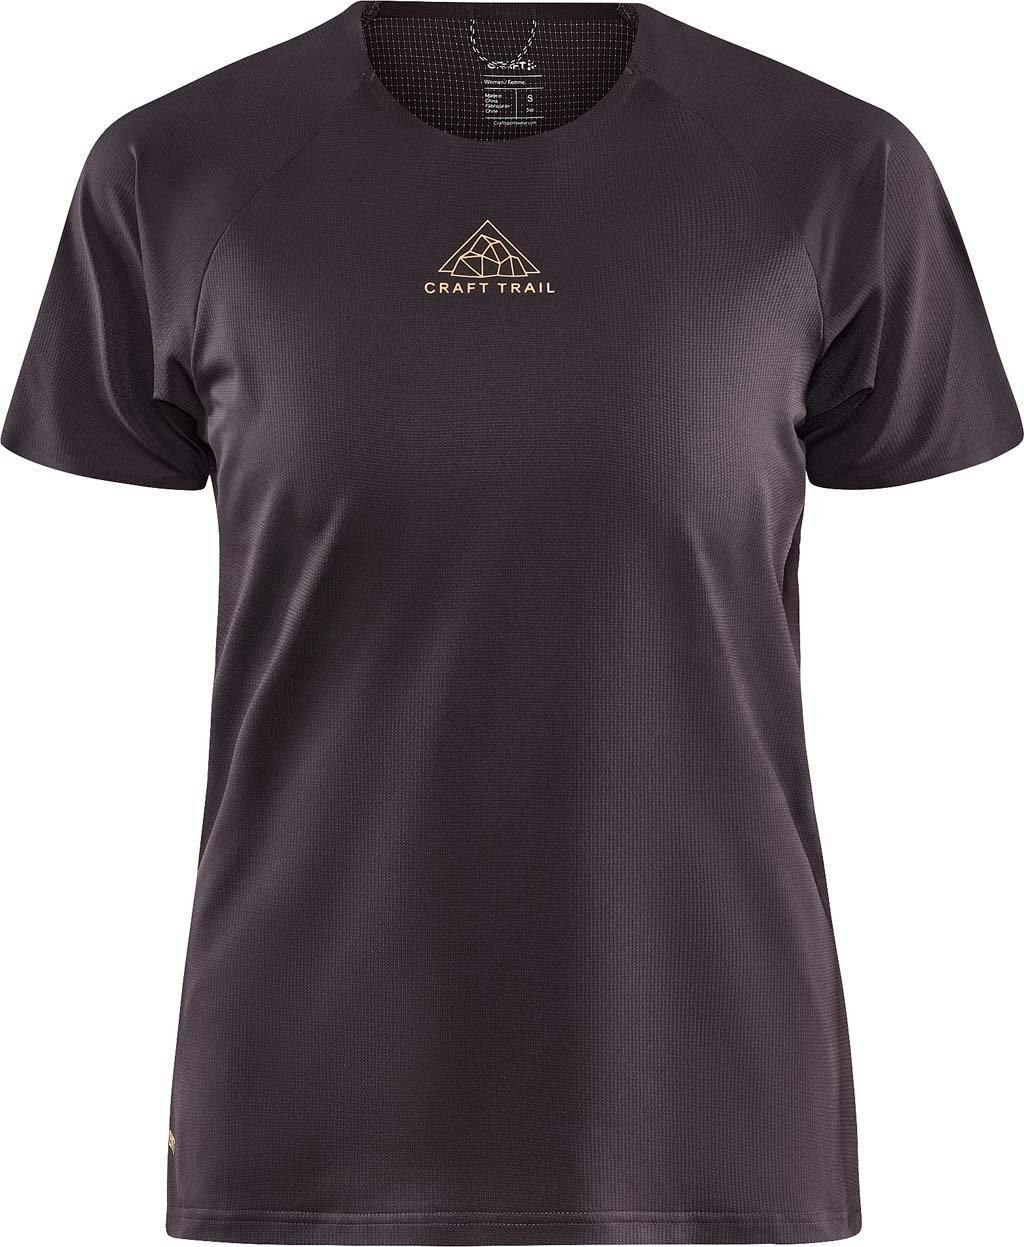 Product image for Pro Trail Short Sleeve T-Shirt - Women's